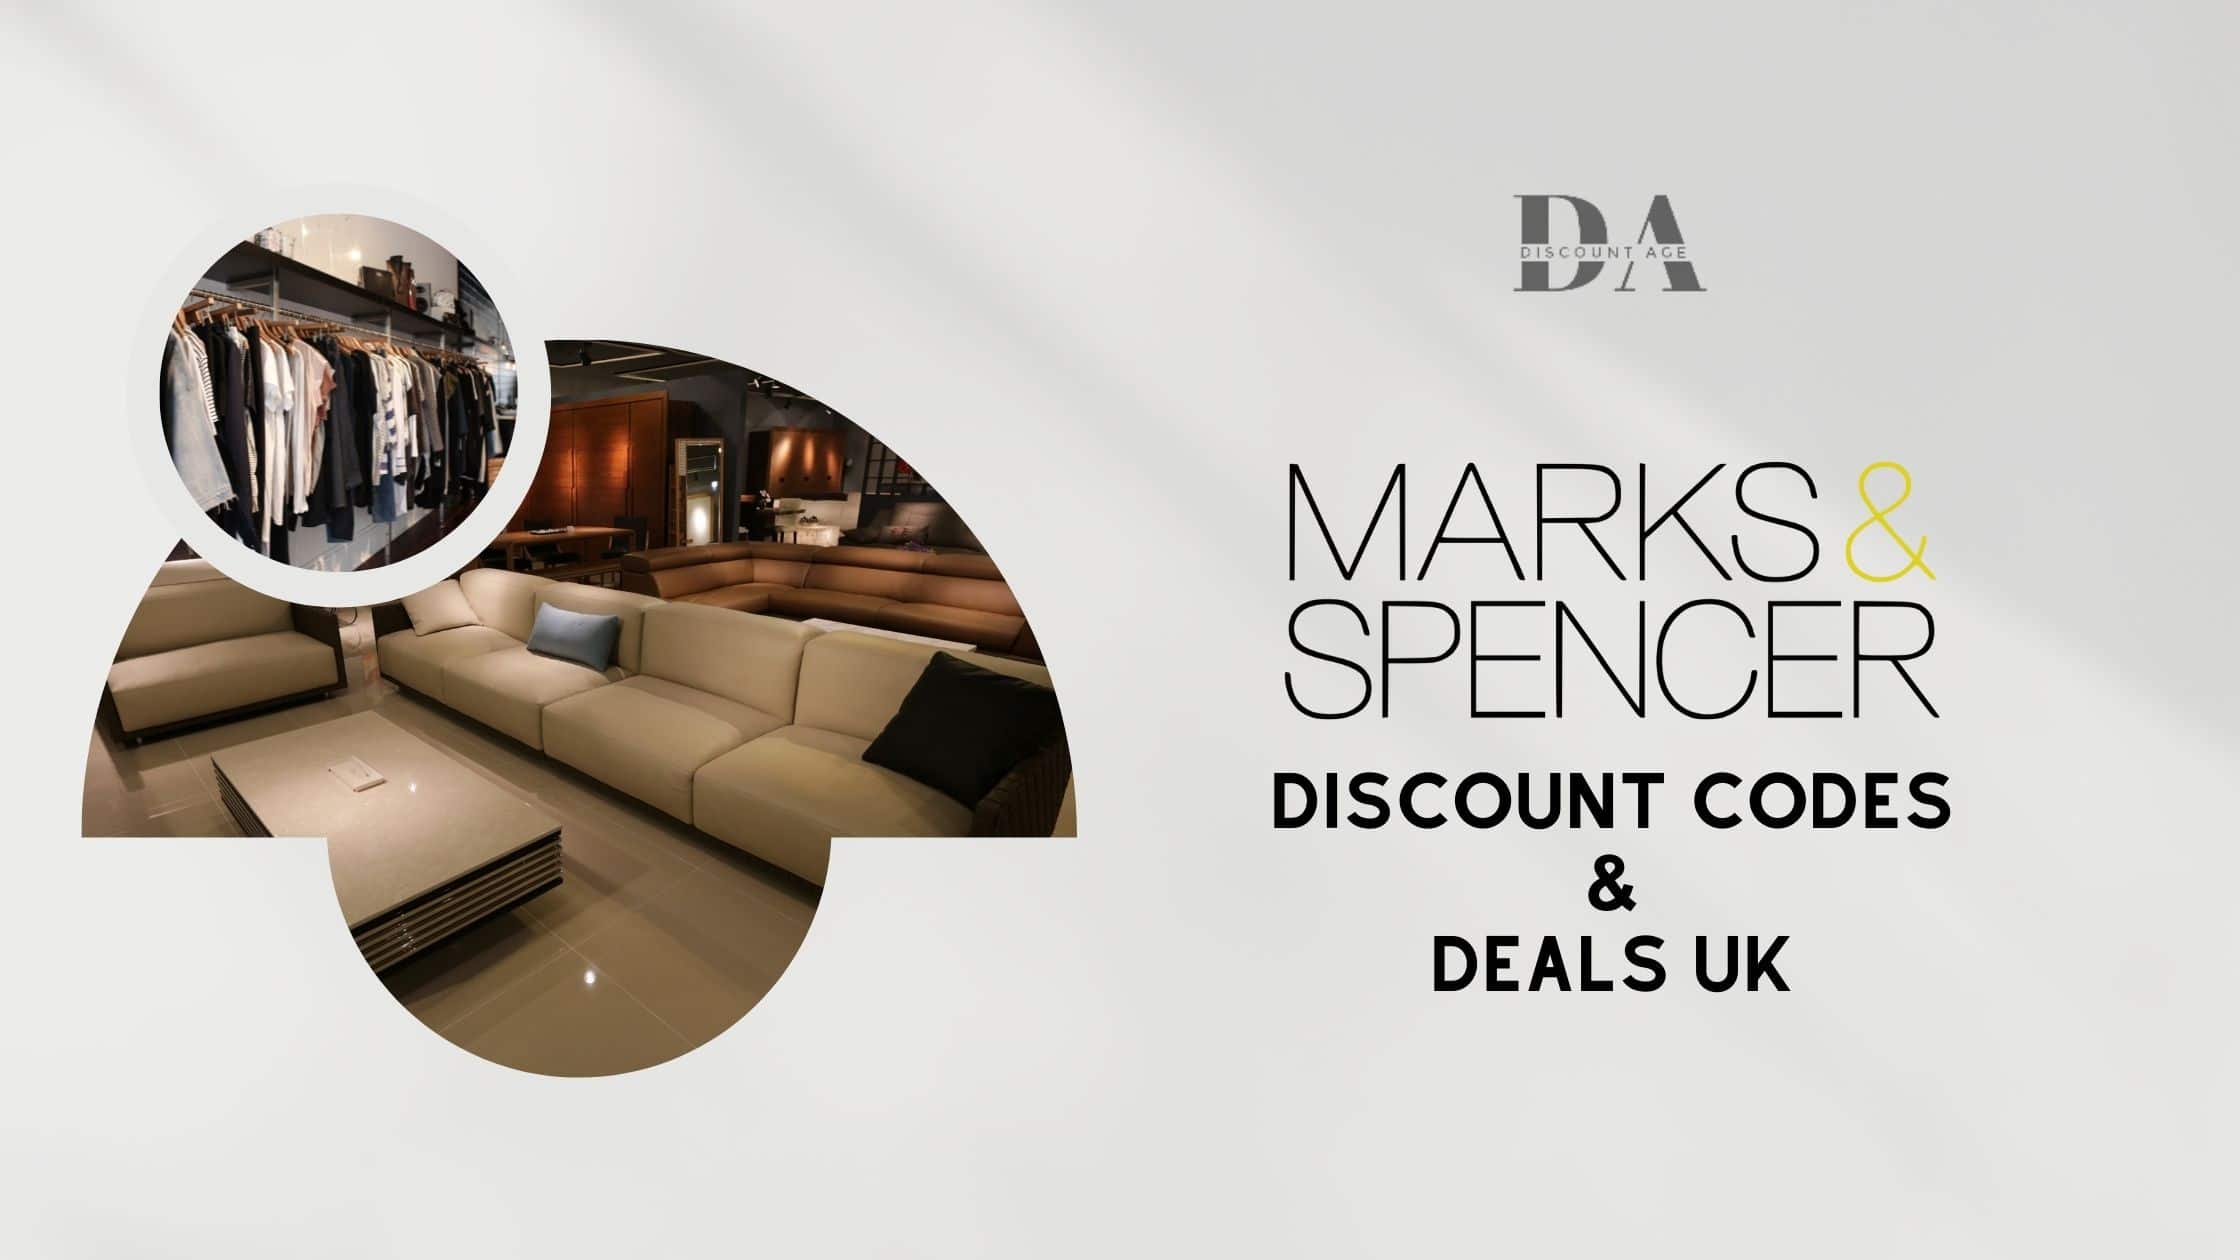 Marks and Spencer Discount Codes and deals uk